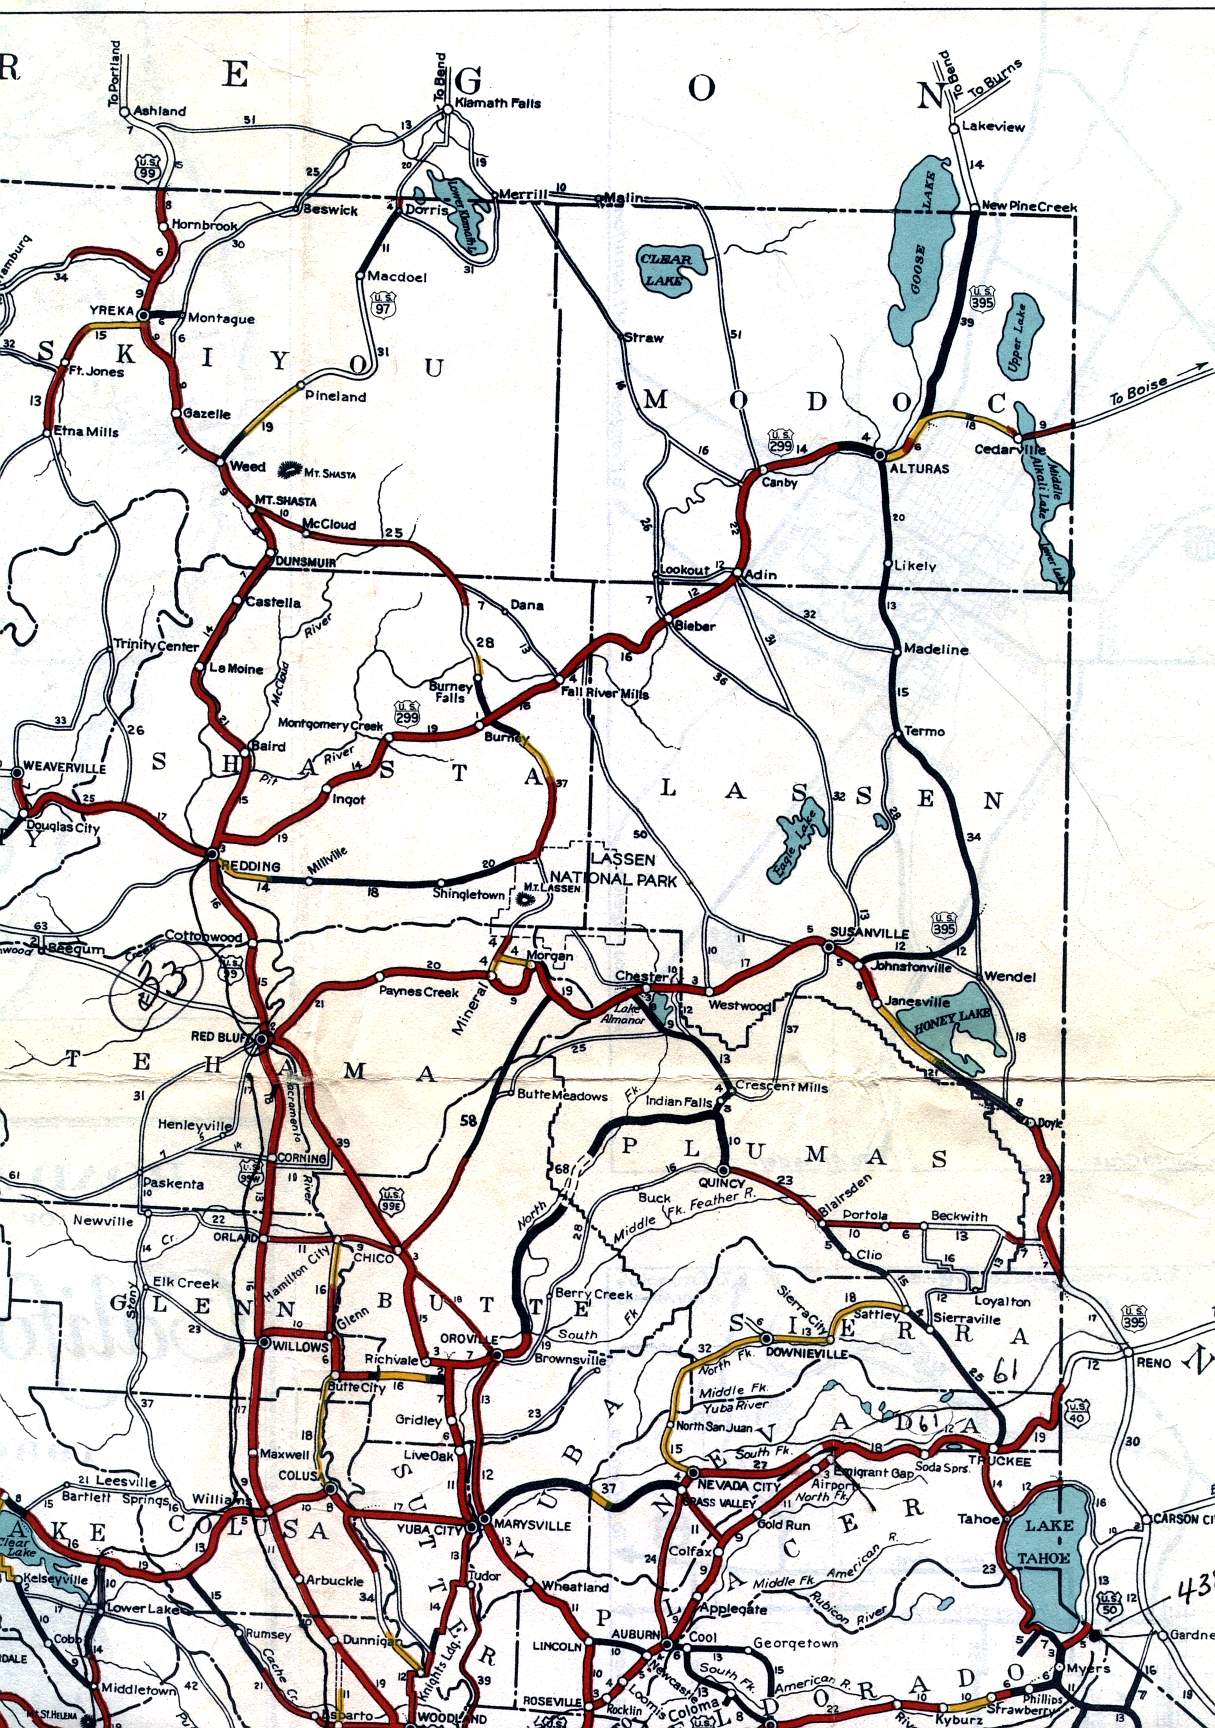 Northeastern California on the 1936 California official highway map